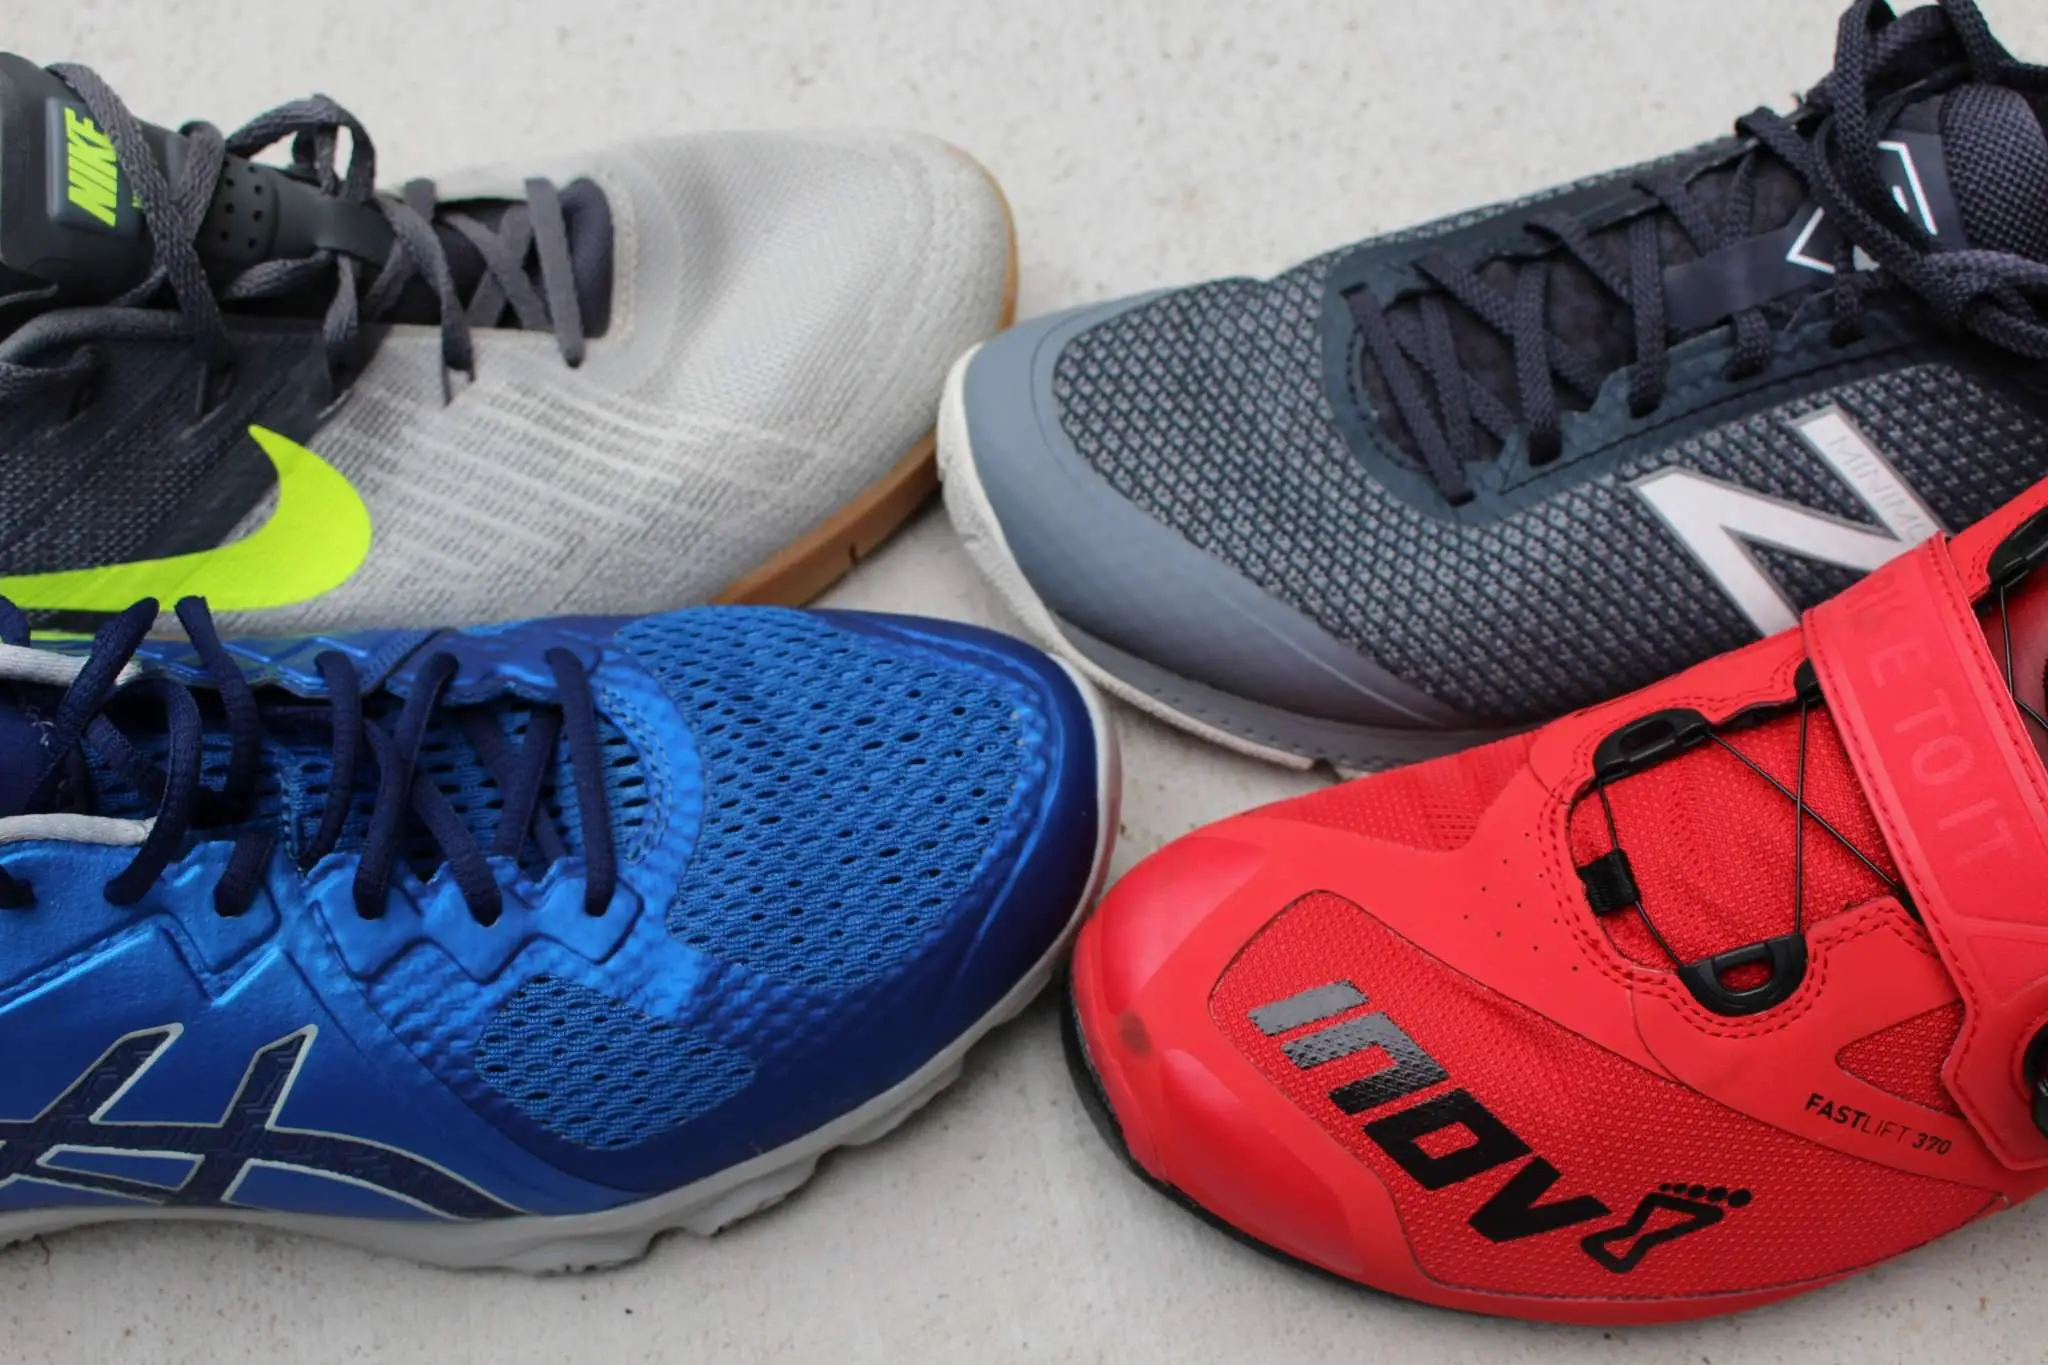 The Best CrossFit Shoes For Men in 2018